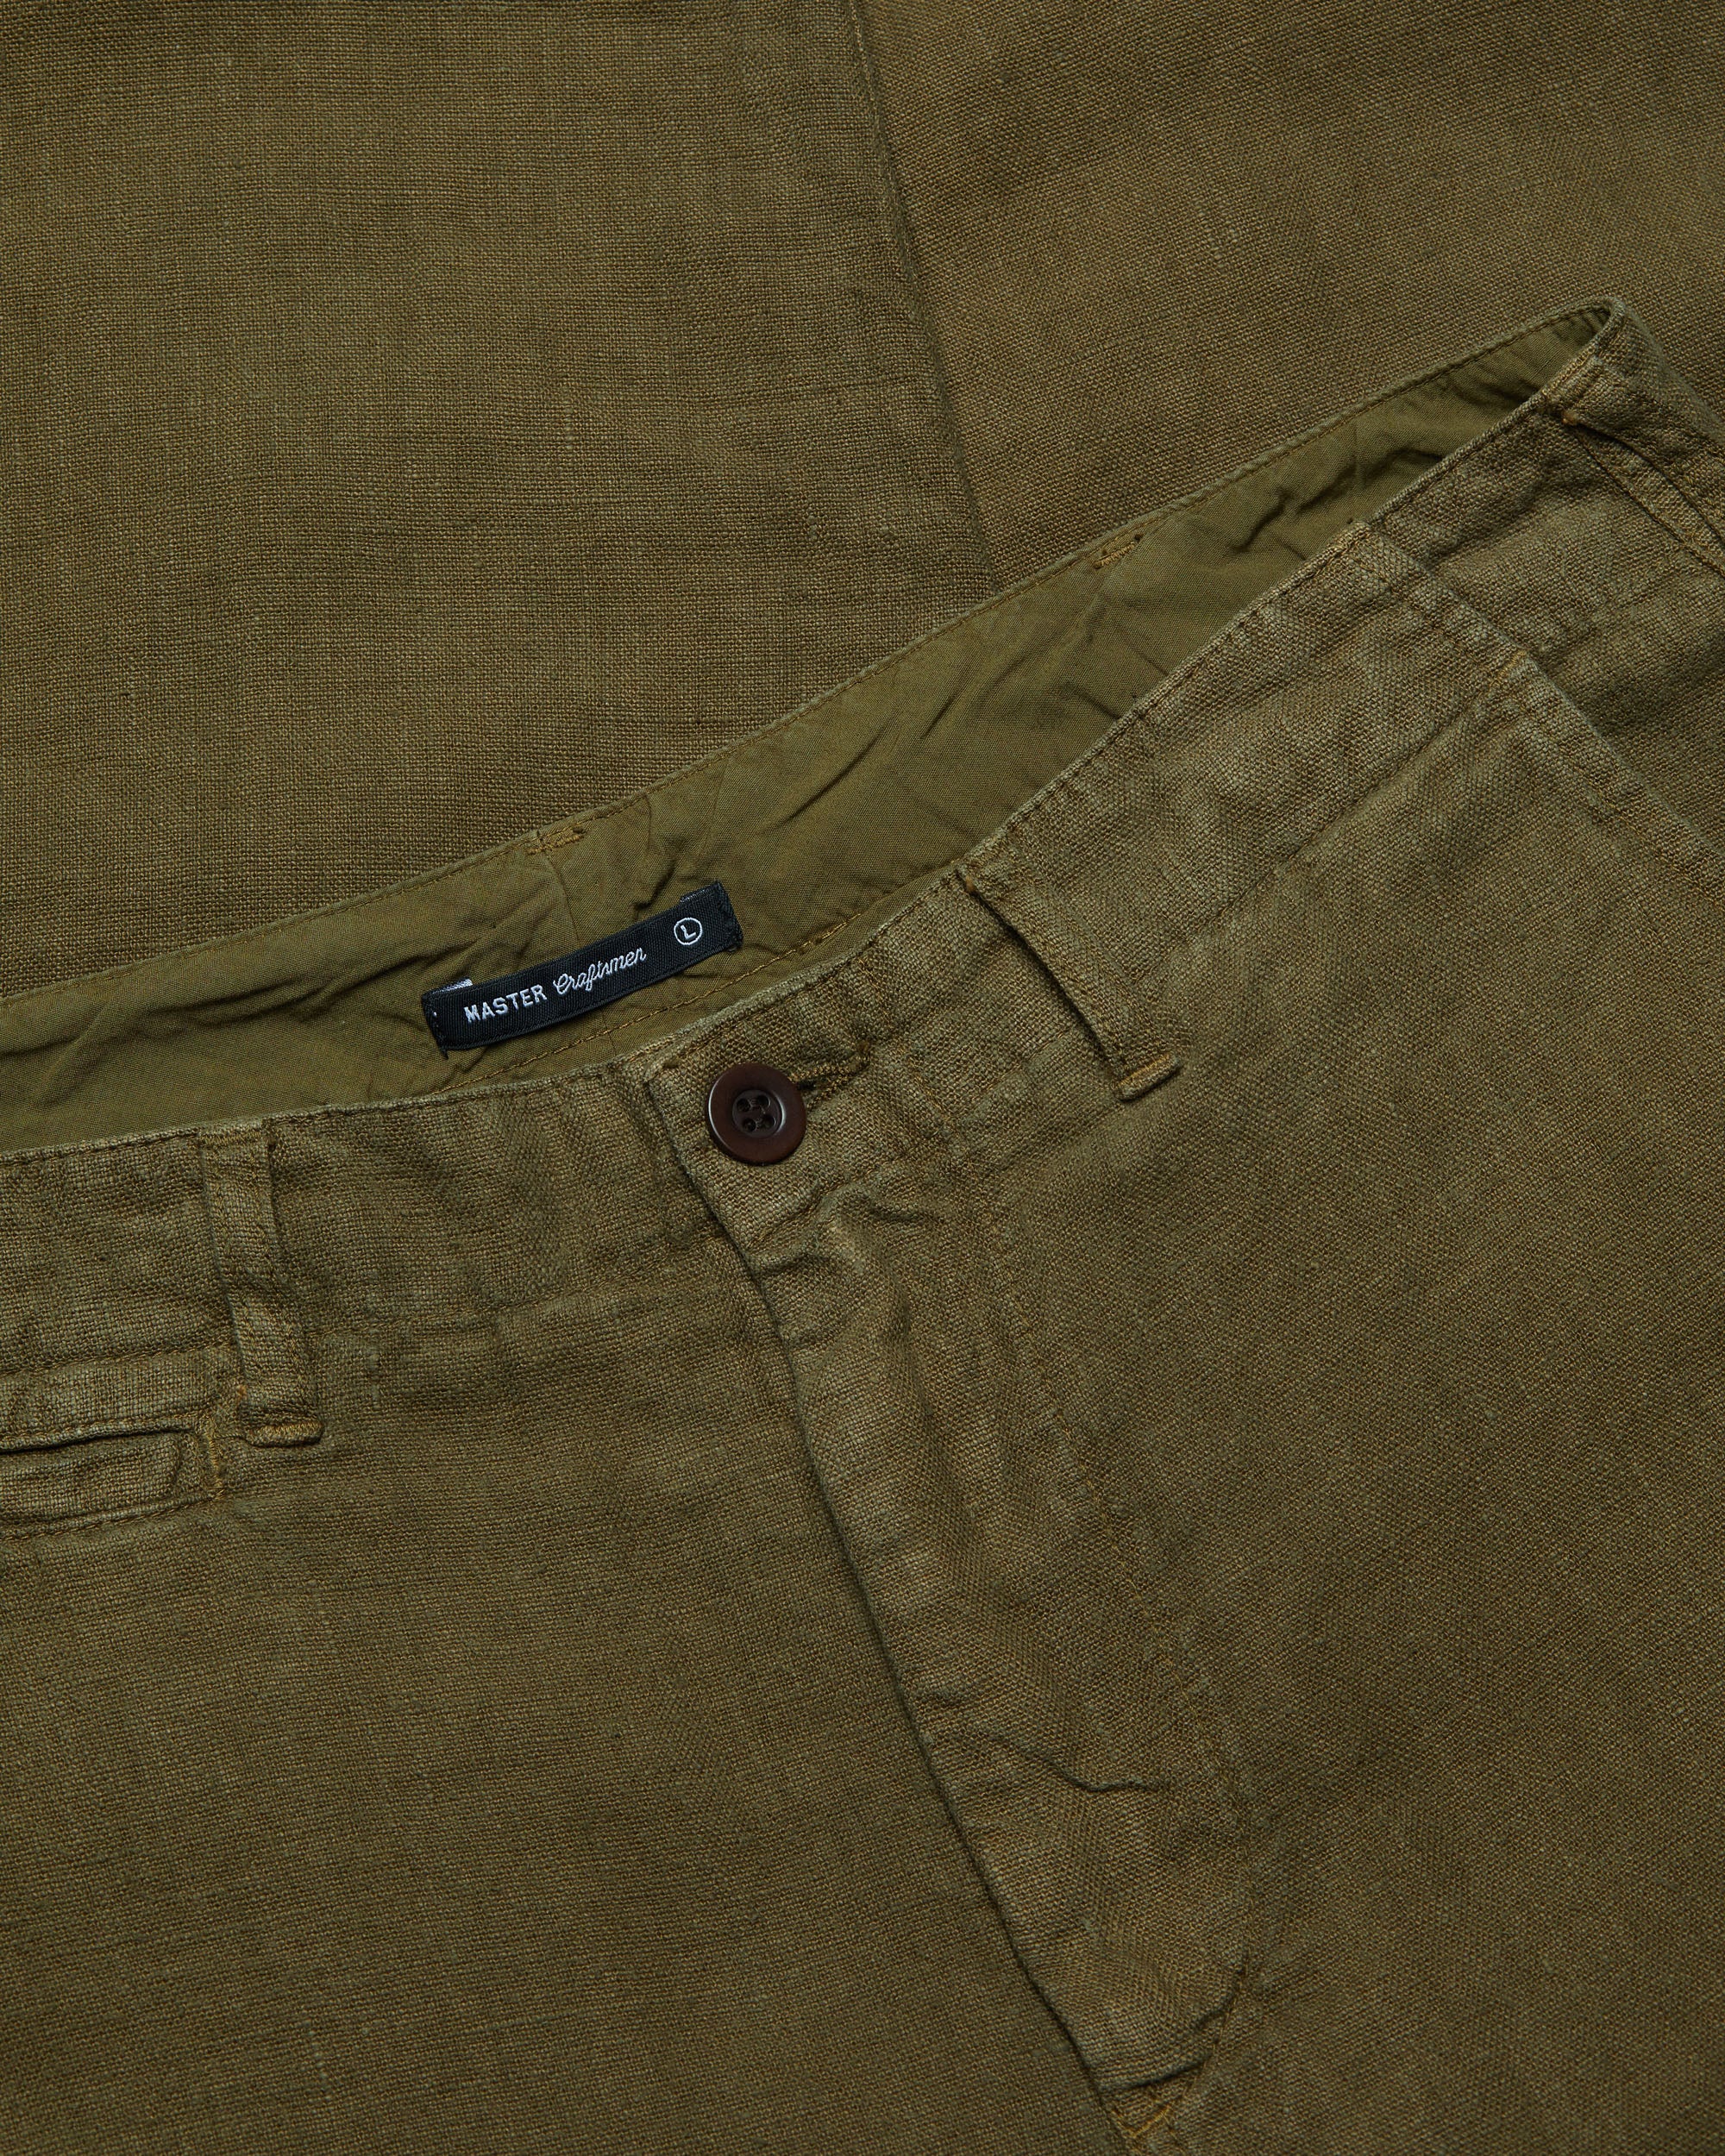 Linen Trousers - Olive